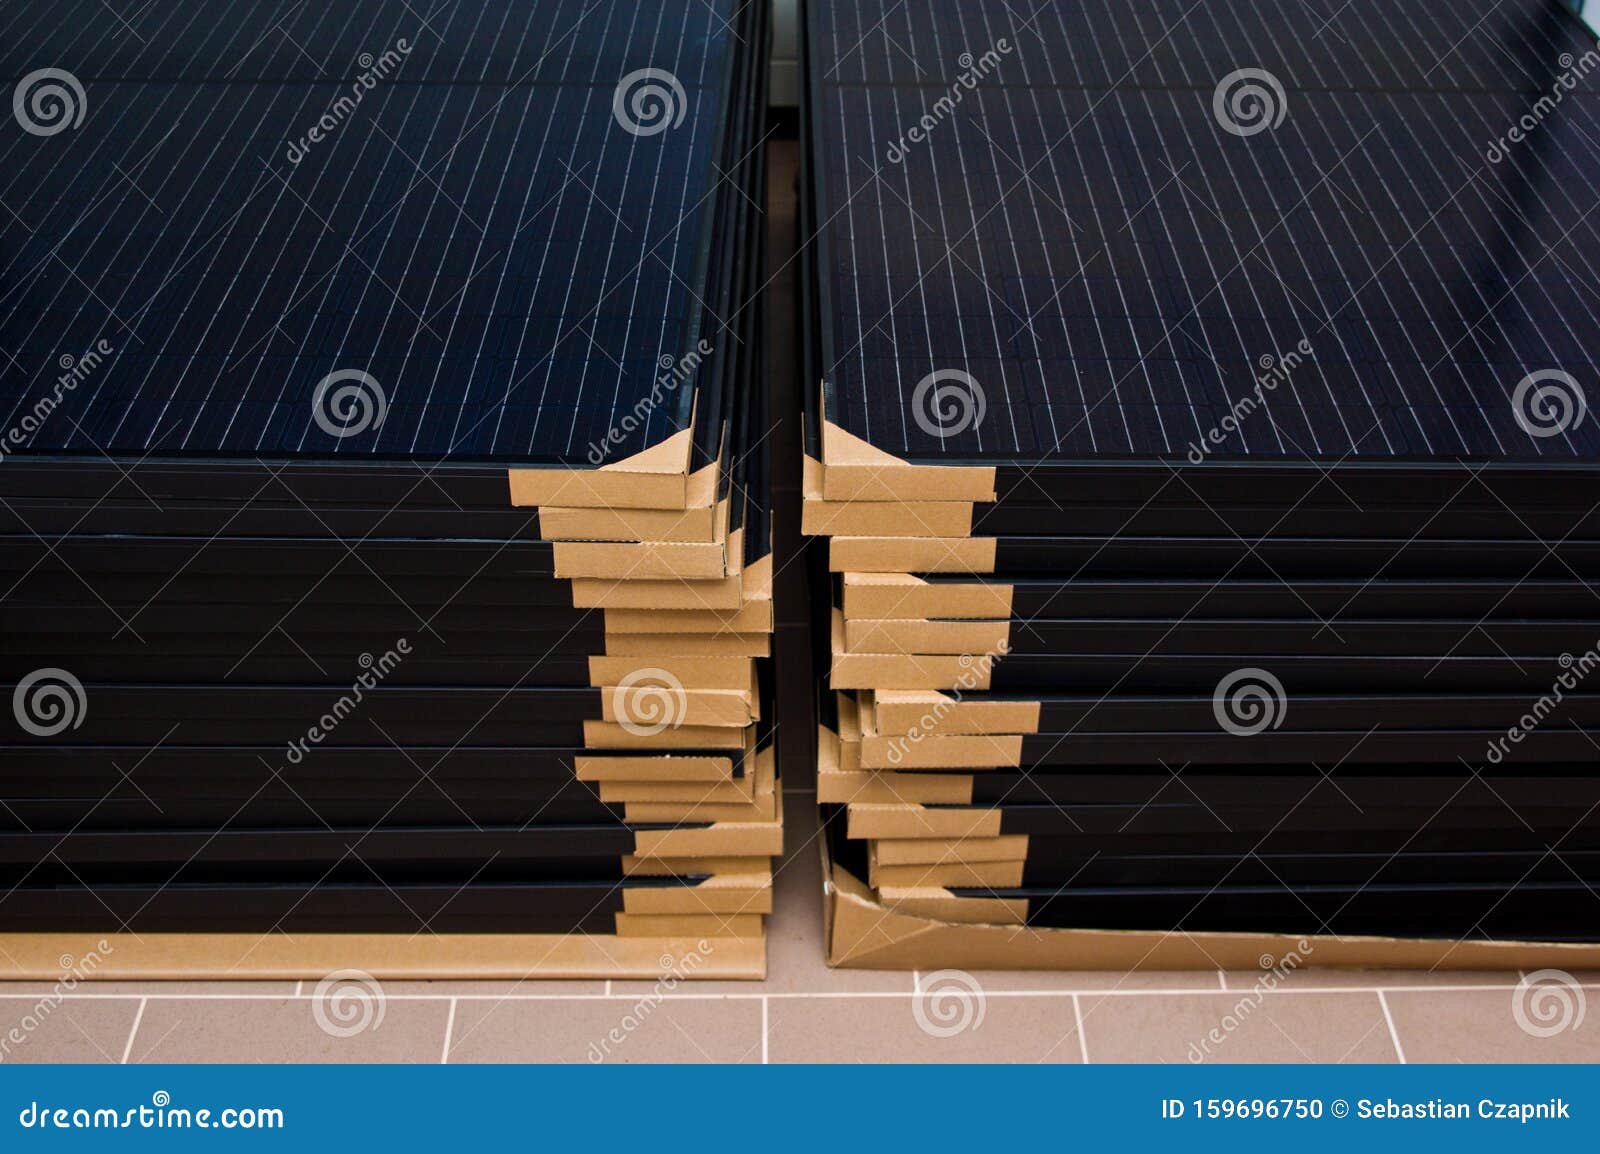 stack of new solar panel ready for installation